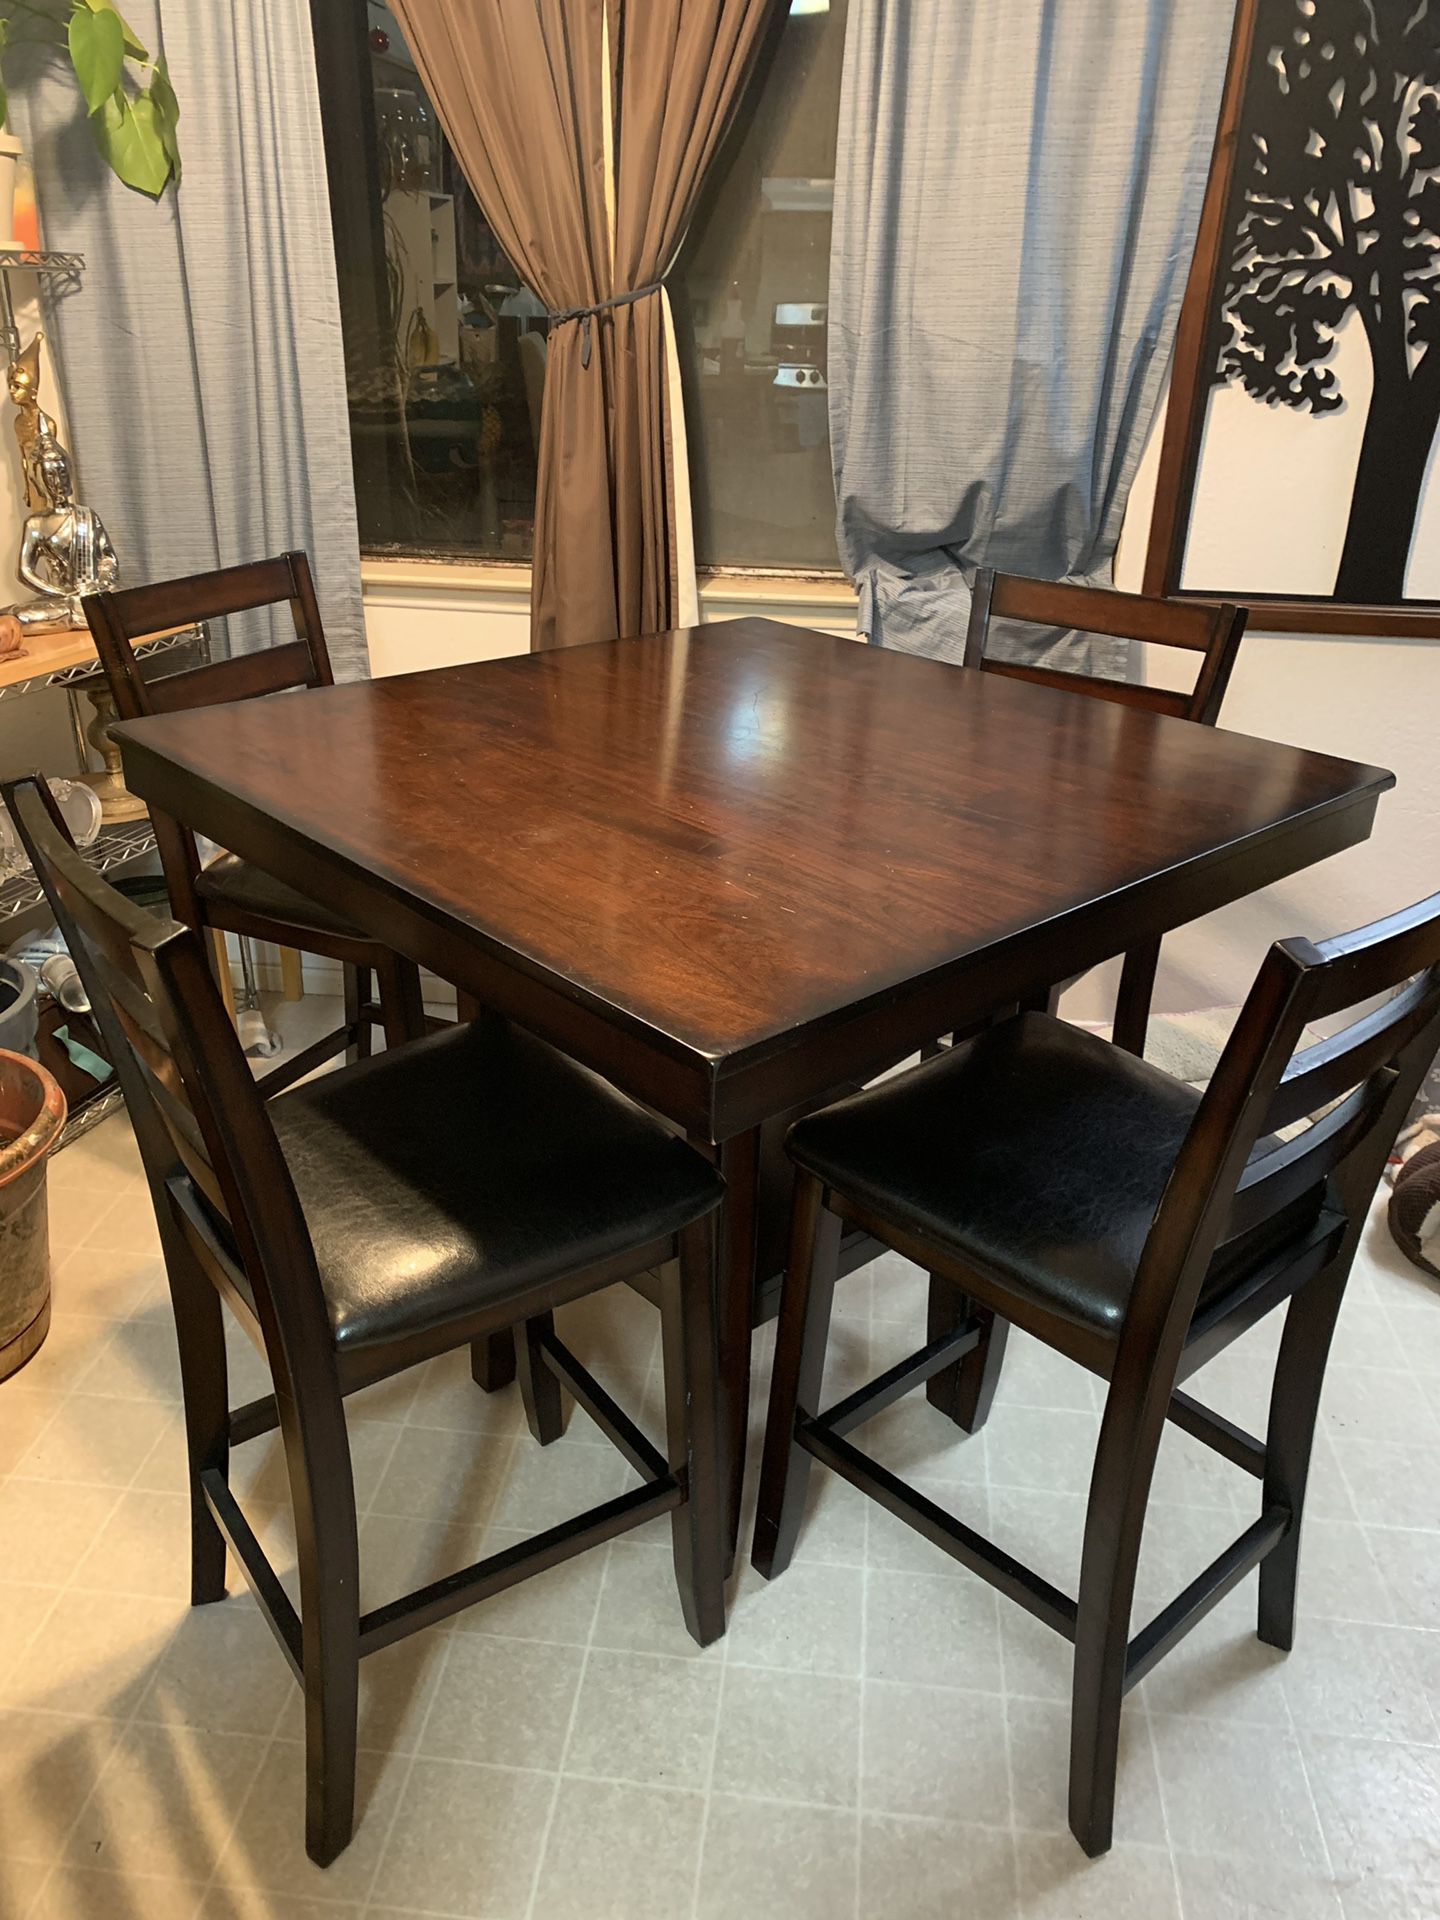 Dining room table and 4 chairs SOLD